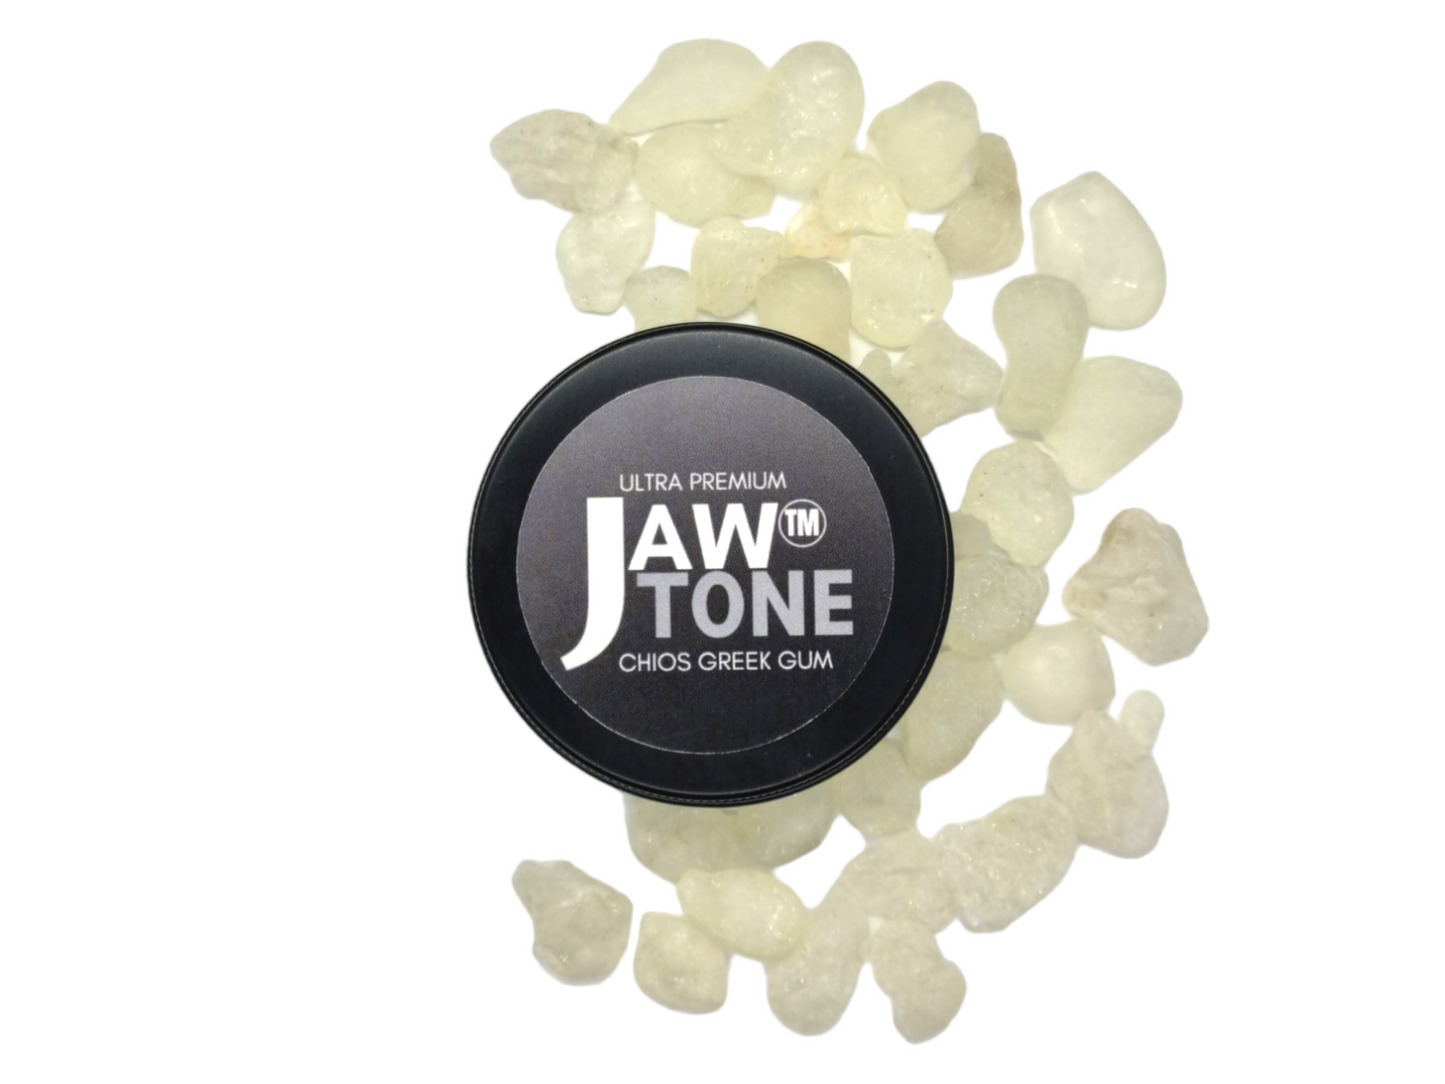 JawTone™ Ultra premium 100% Natural Chios Mastic gum Large tears Vegan handpicked specially selected natural chewing gum 1-2 MONTHS SUPPLY